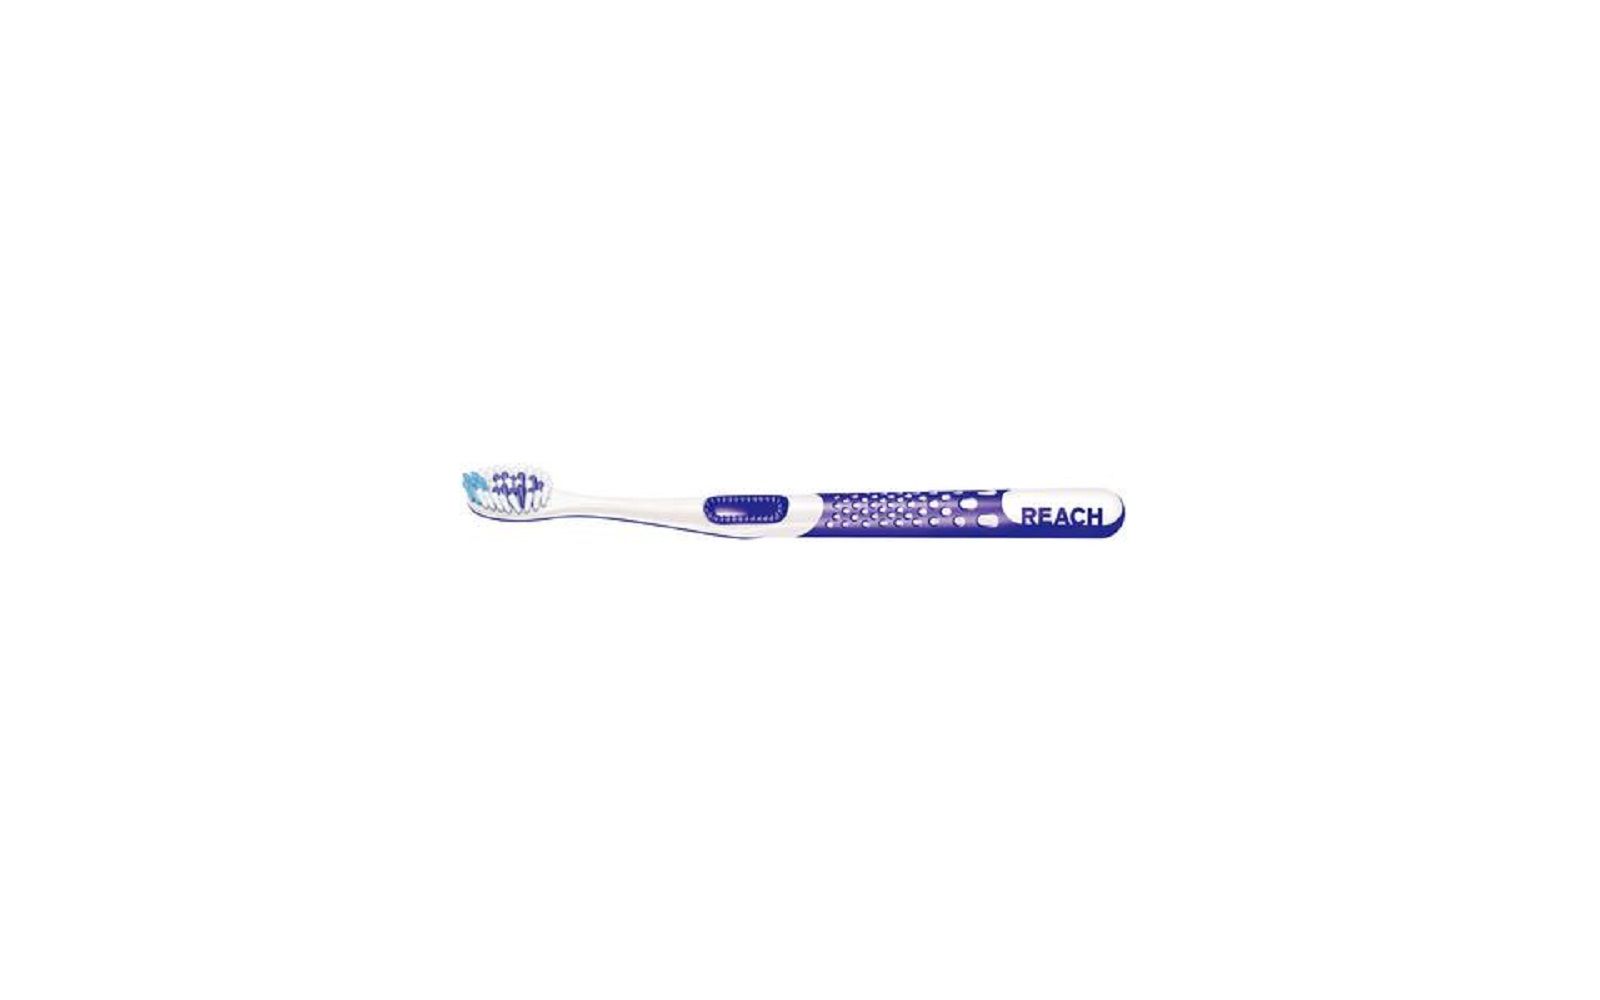 Reach® total care floss clean™ toothbrush – soft, 12/pkg